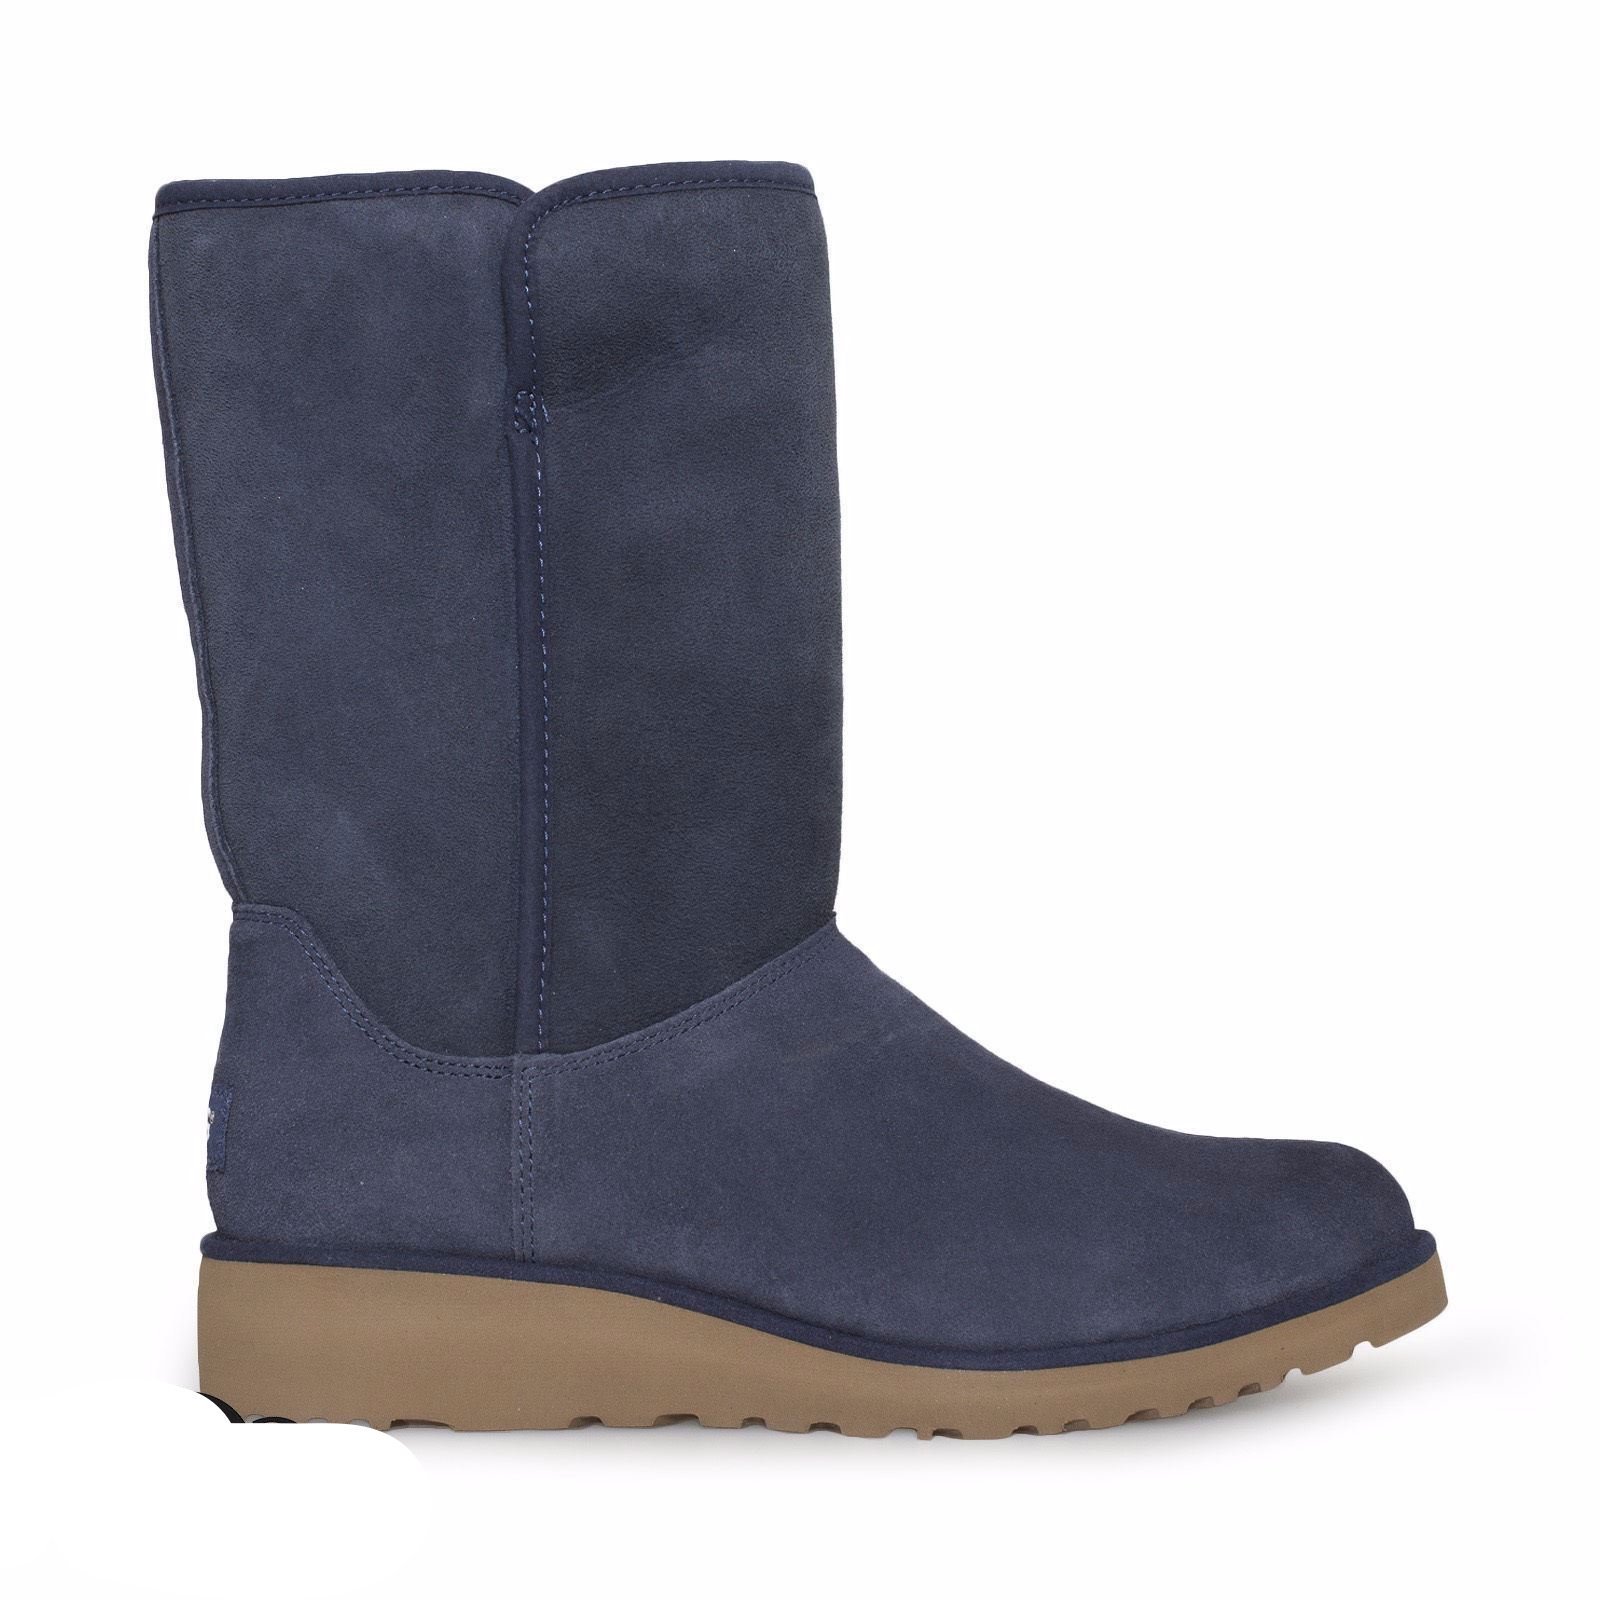 Ugg Australia Boots Are Up to 60 